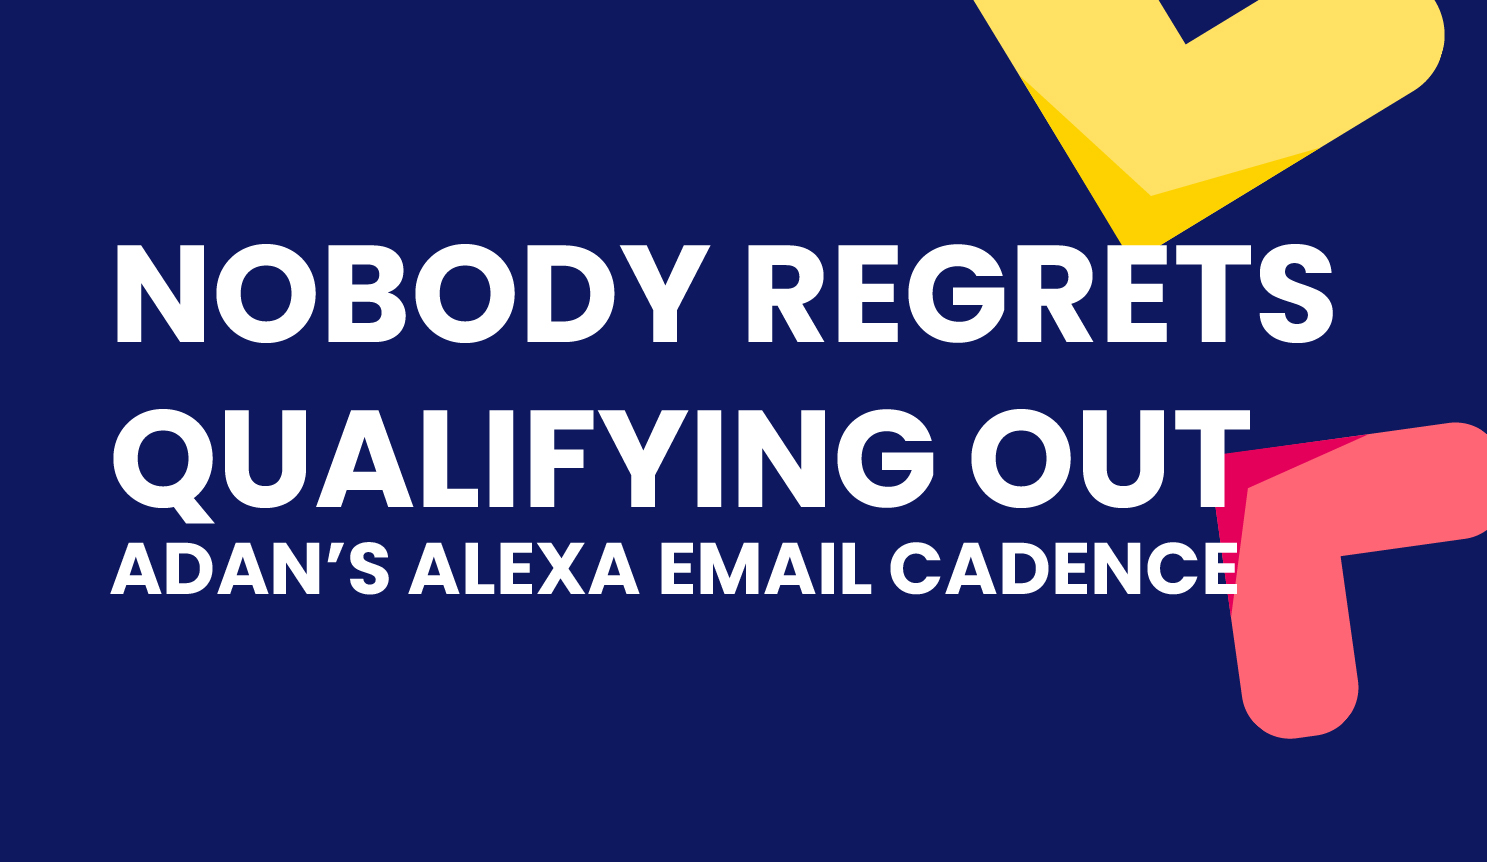 Nobody Regrets Qualifying Out - Adan’s Alexa Email Cadence